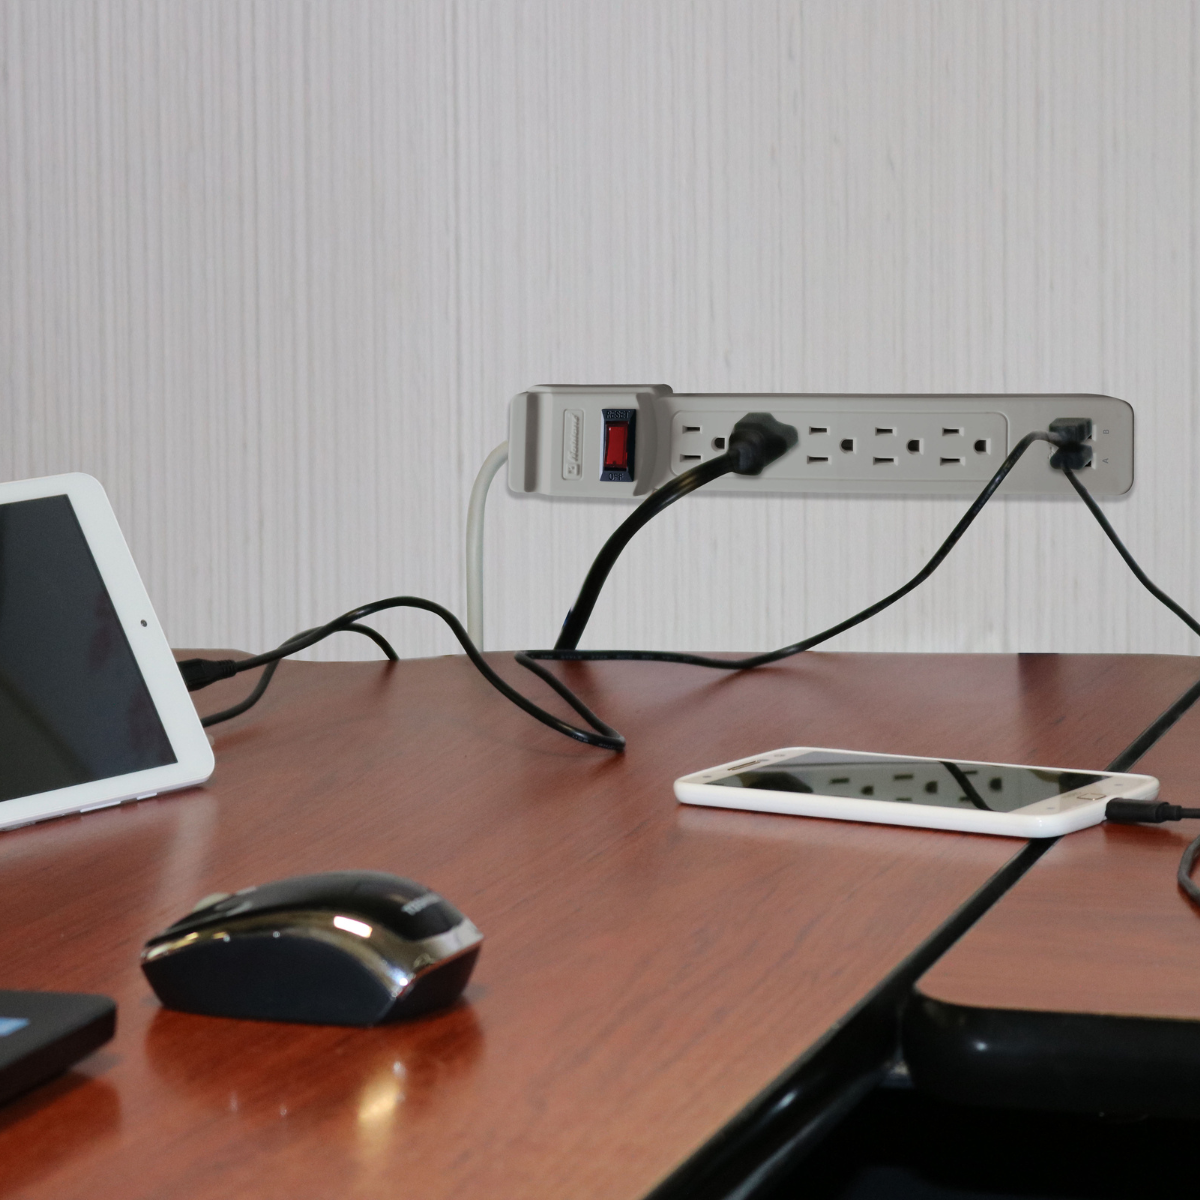 5 Outlet Power Strip SS-550 USB